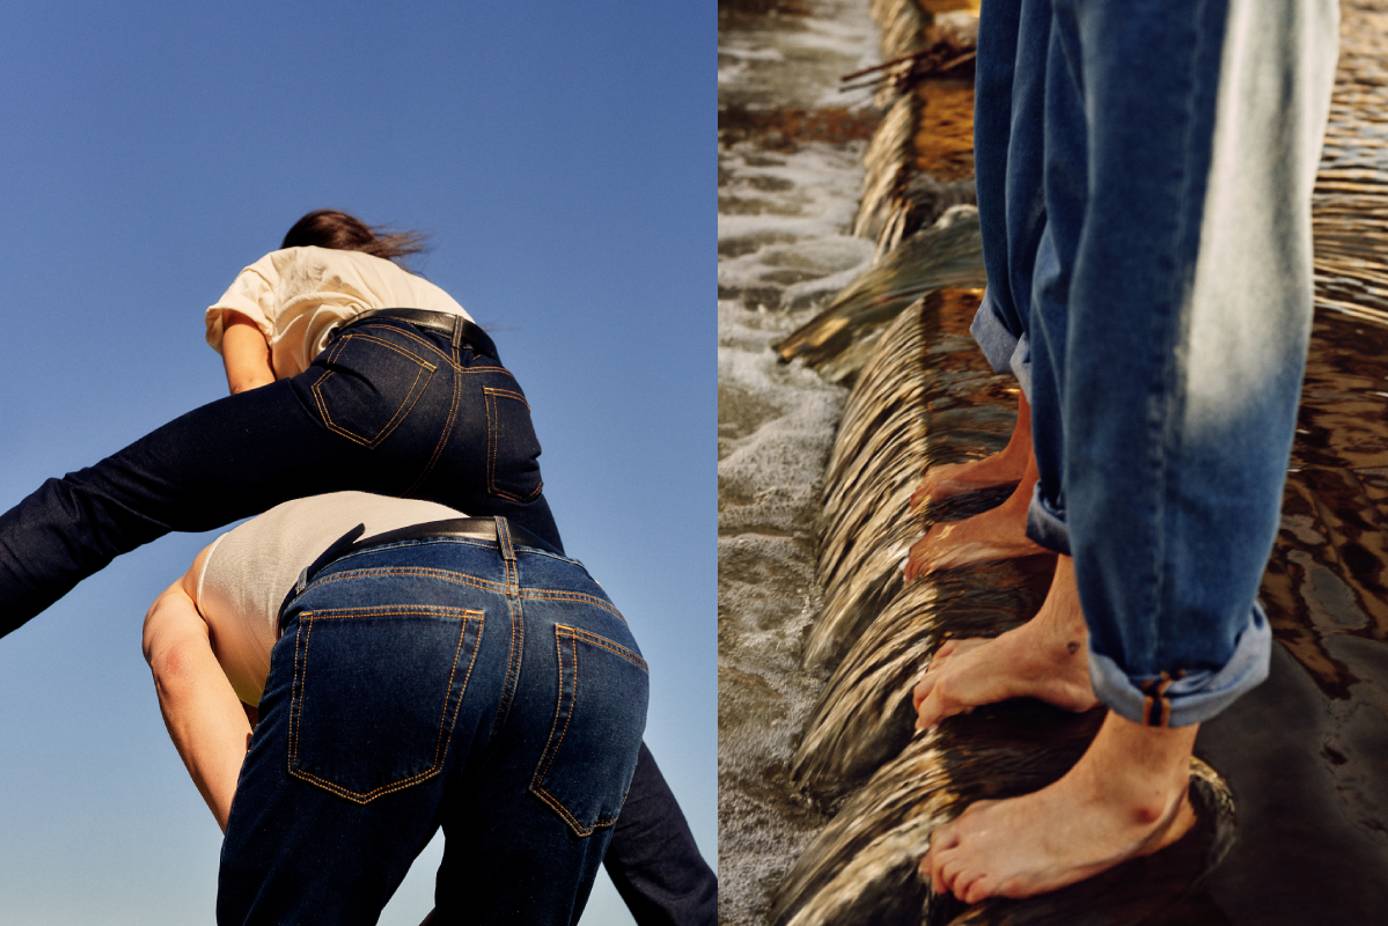 Med det samme Mellem Oversigt Jeans and denim: everything you need to know about jeans